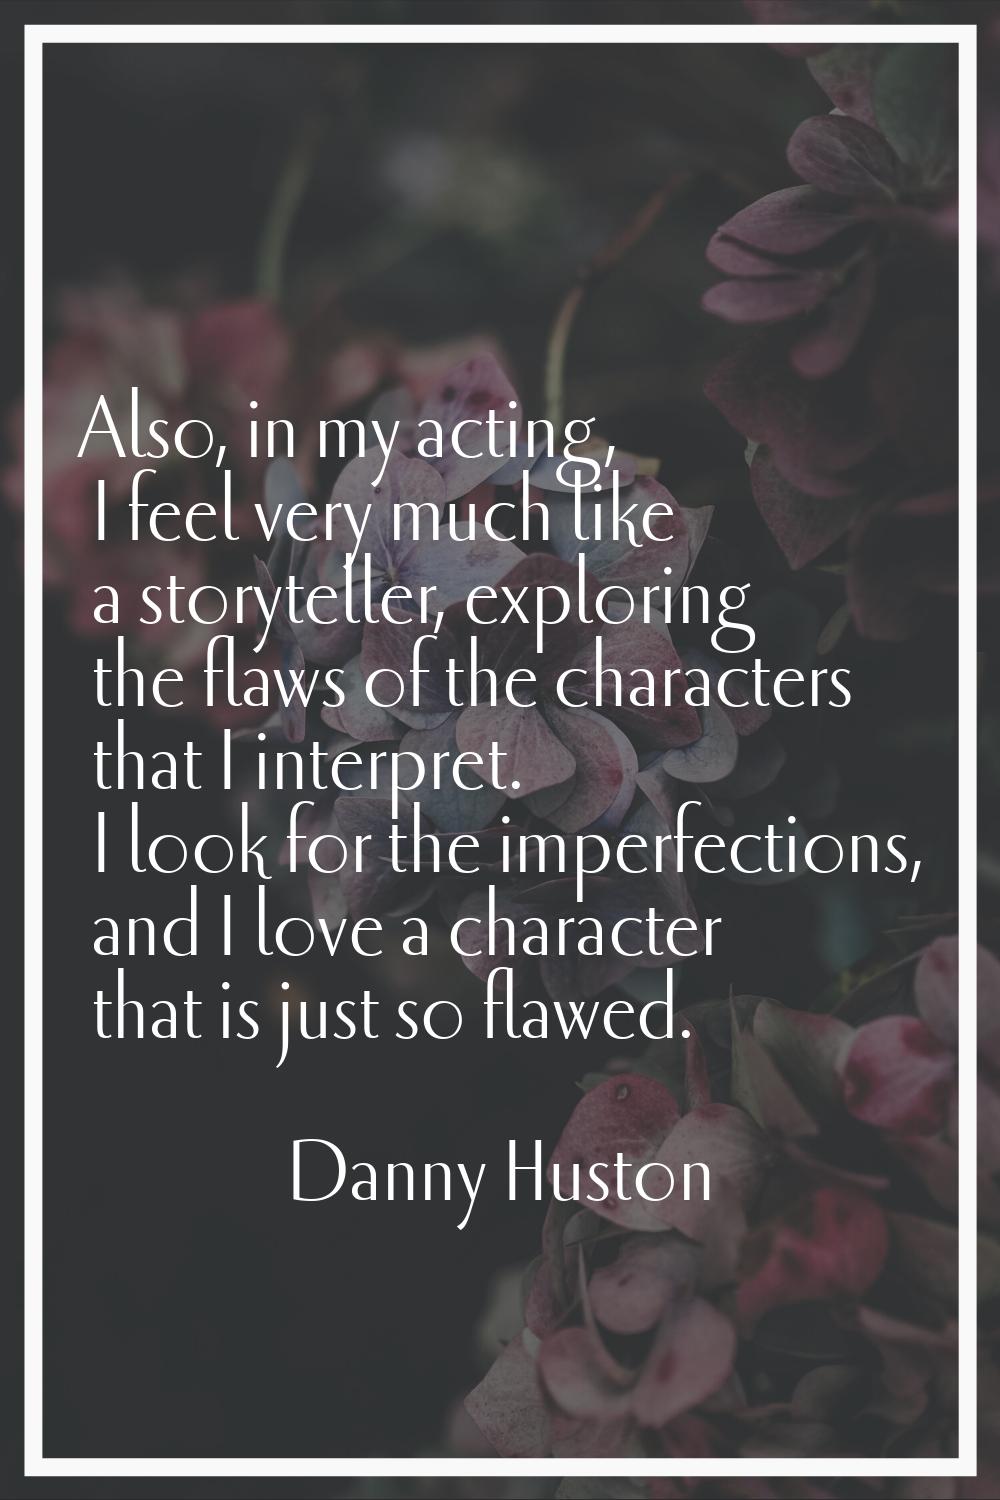 Also, in my acting, I feel very much like a storyteller, exploring the flaws of the characters that